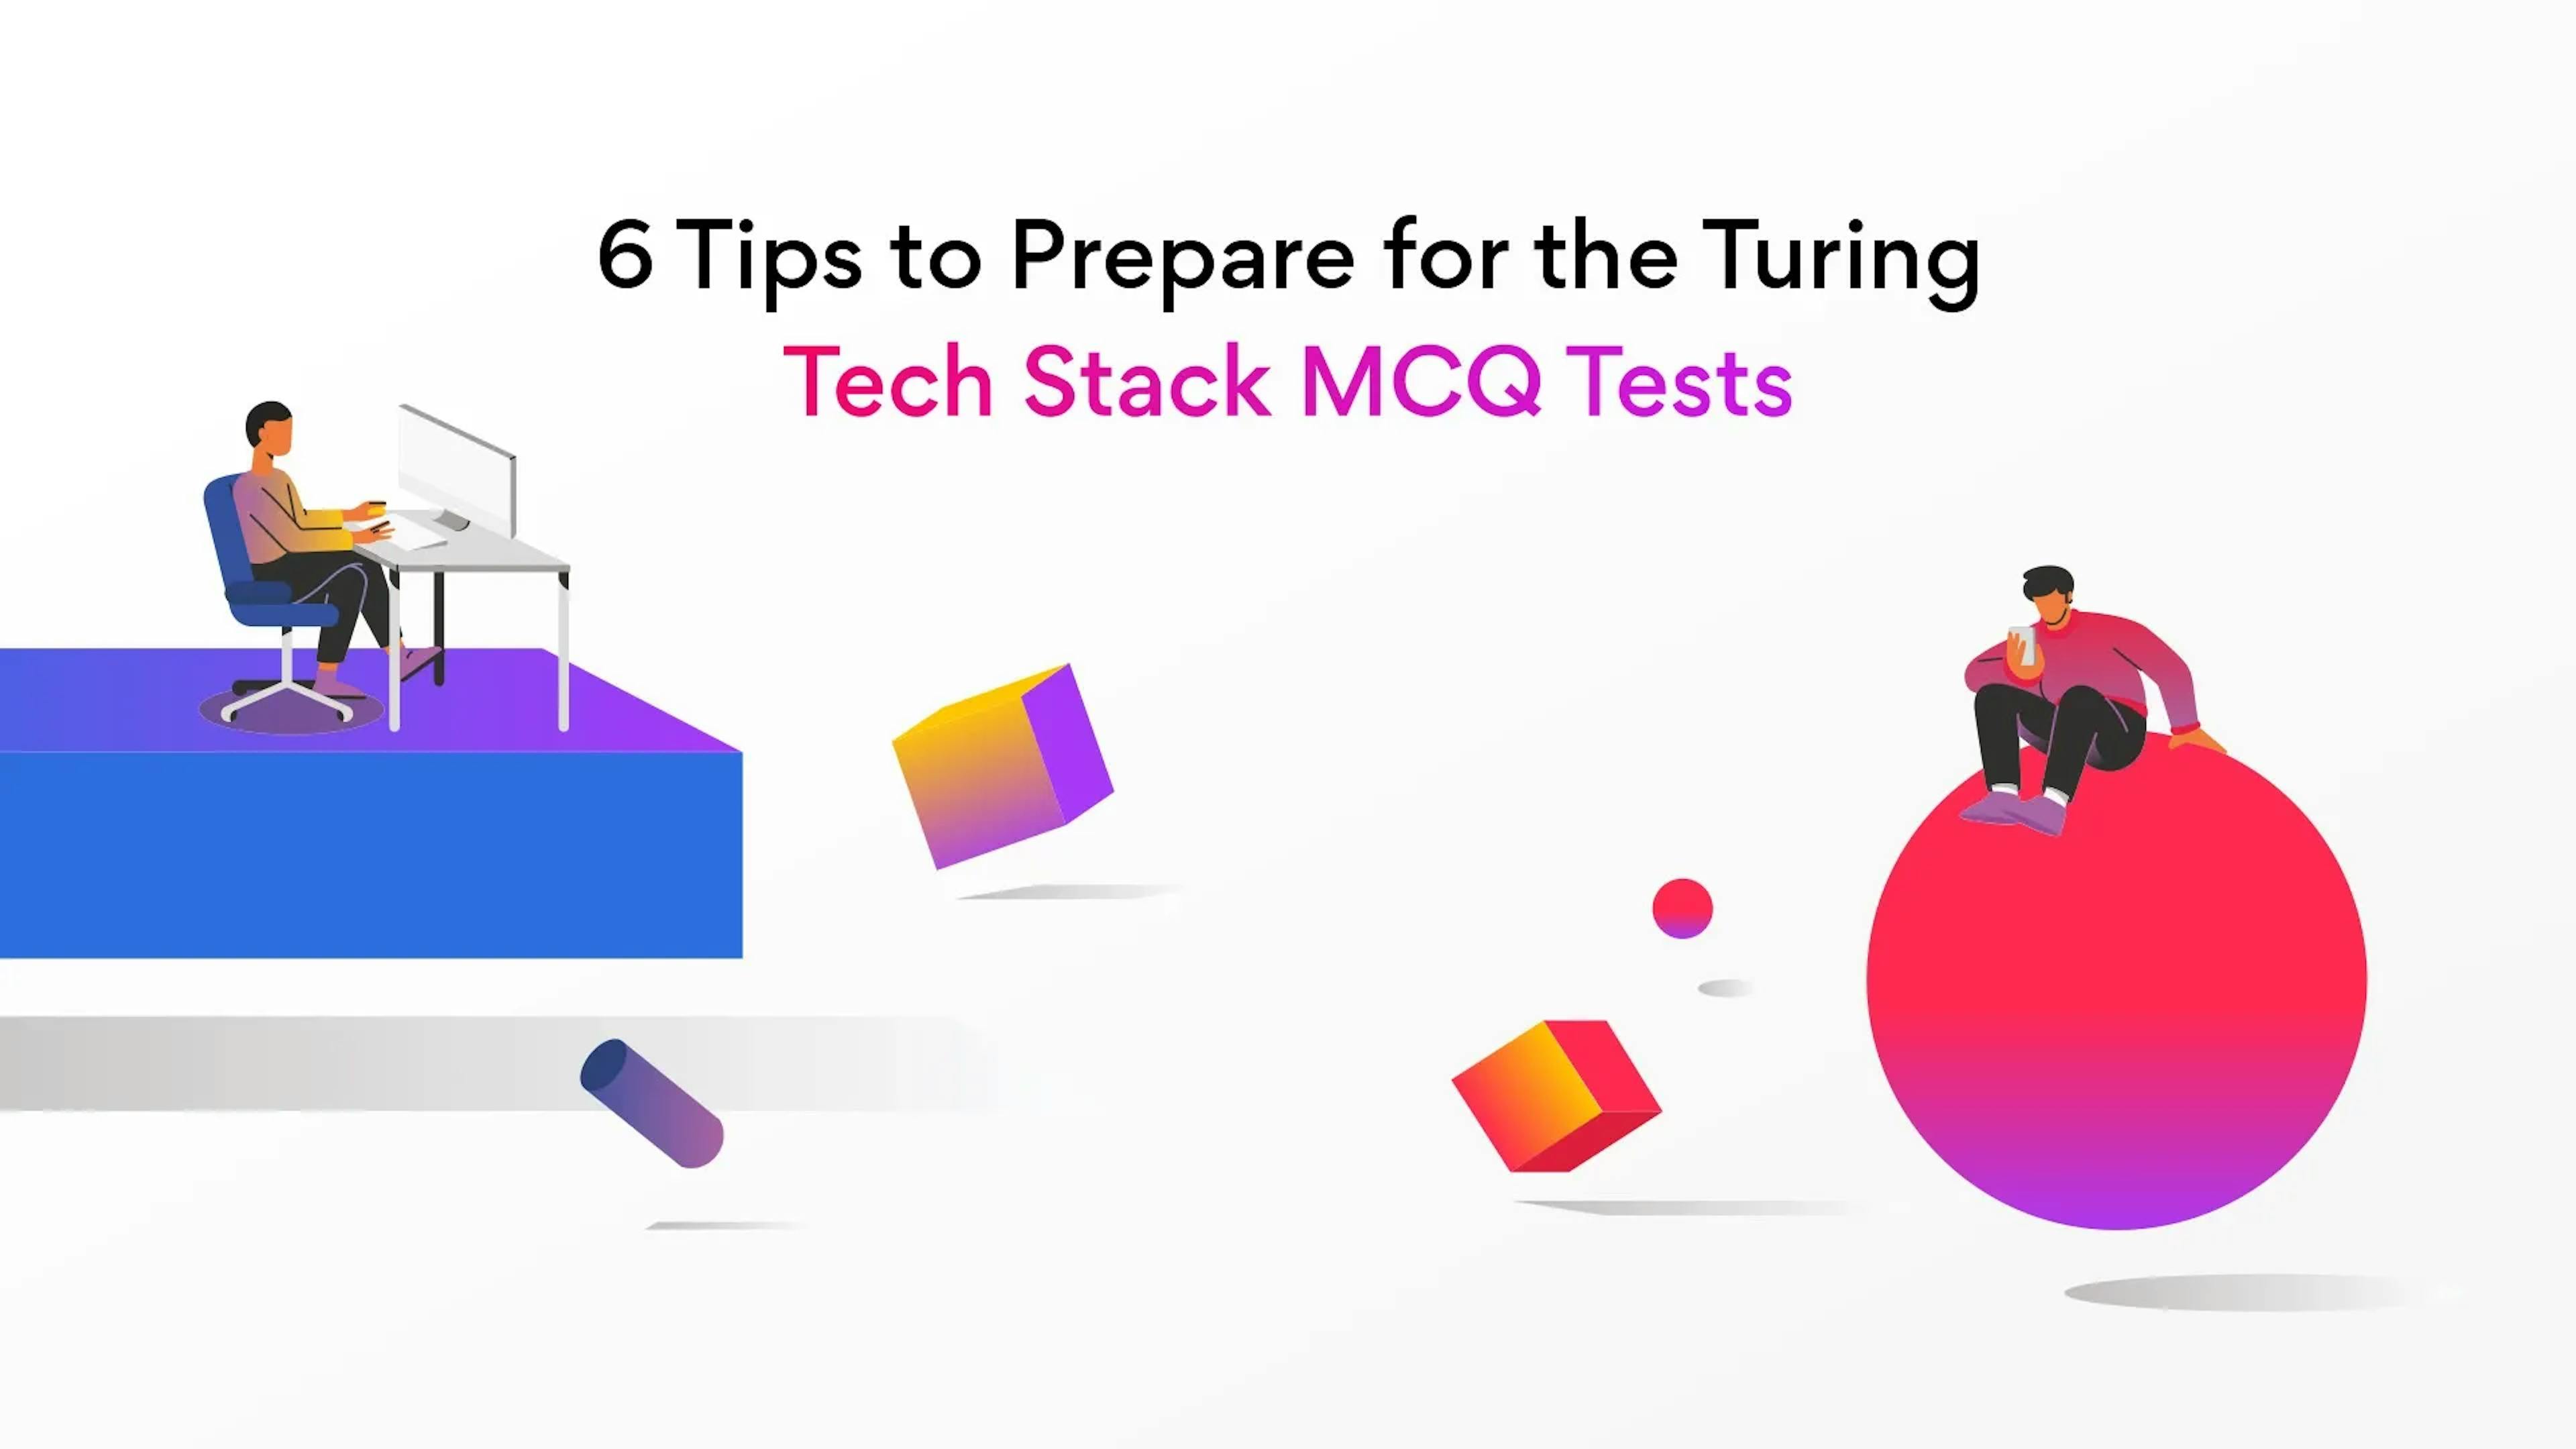 Six Tips to Prepare for the Turing Developer Tests or Tech Stack MCQ Tests